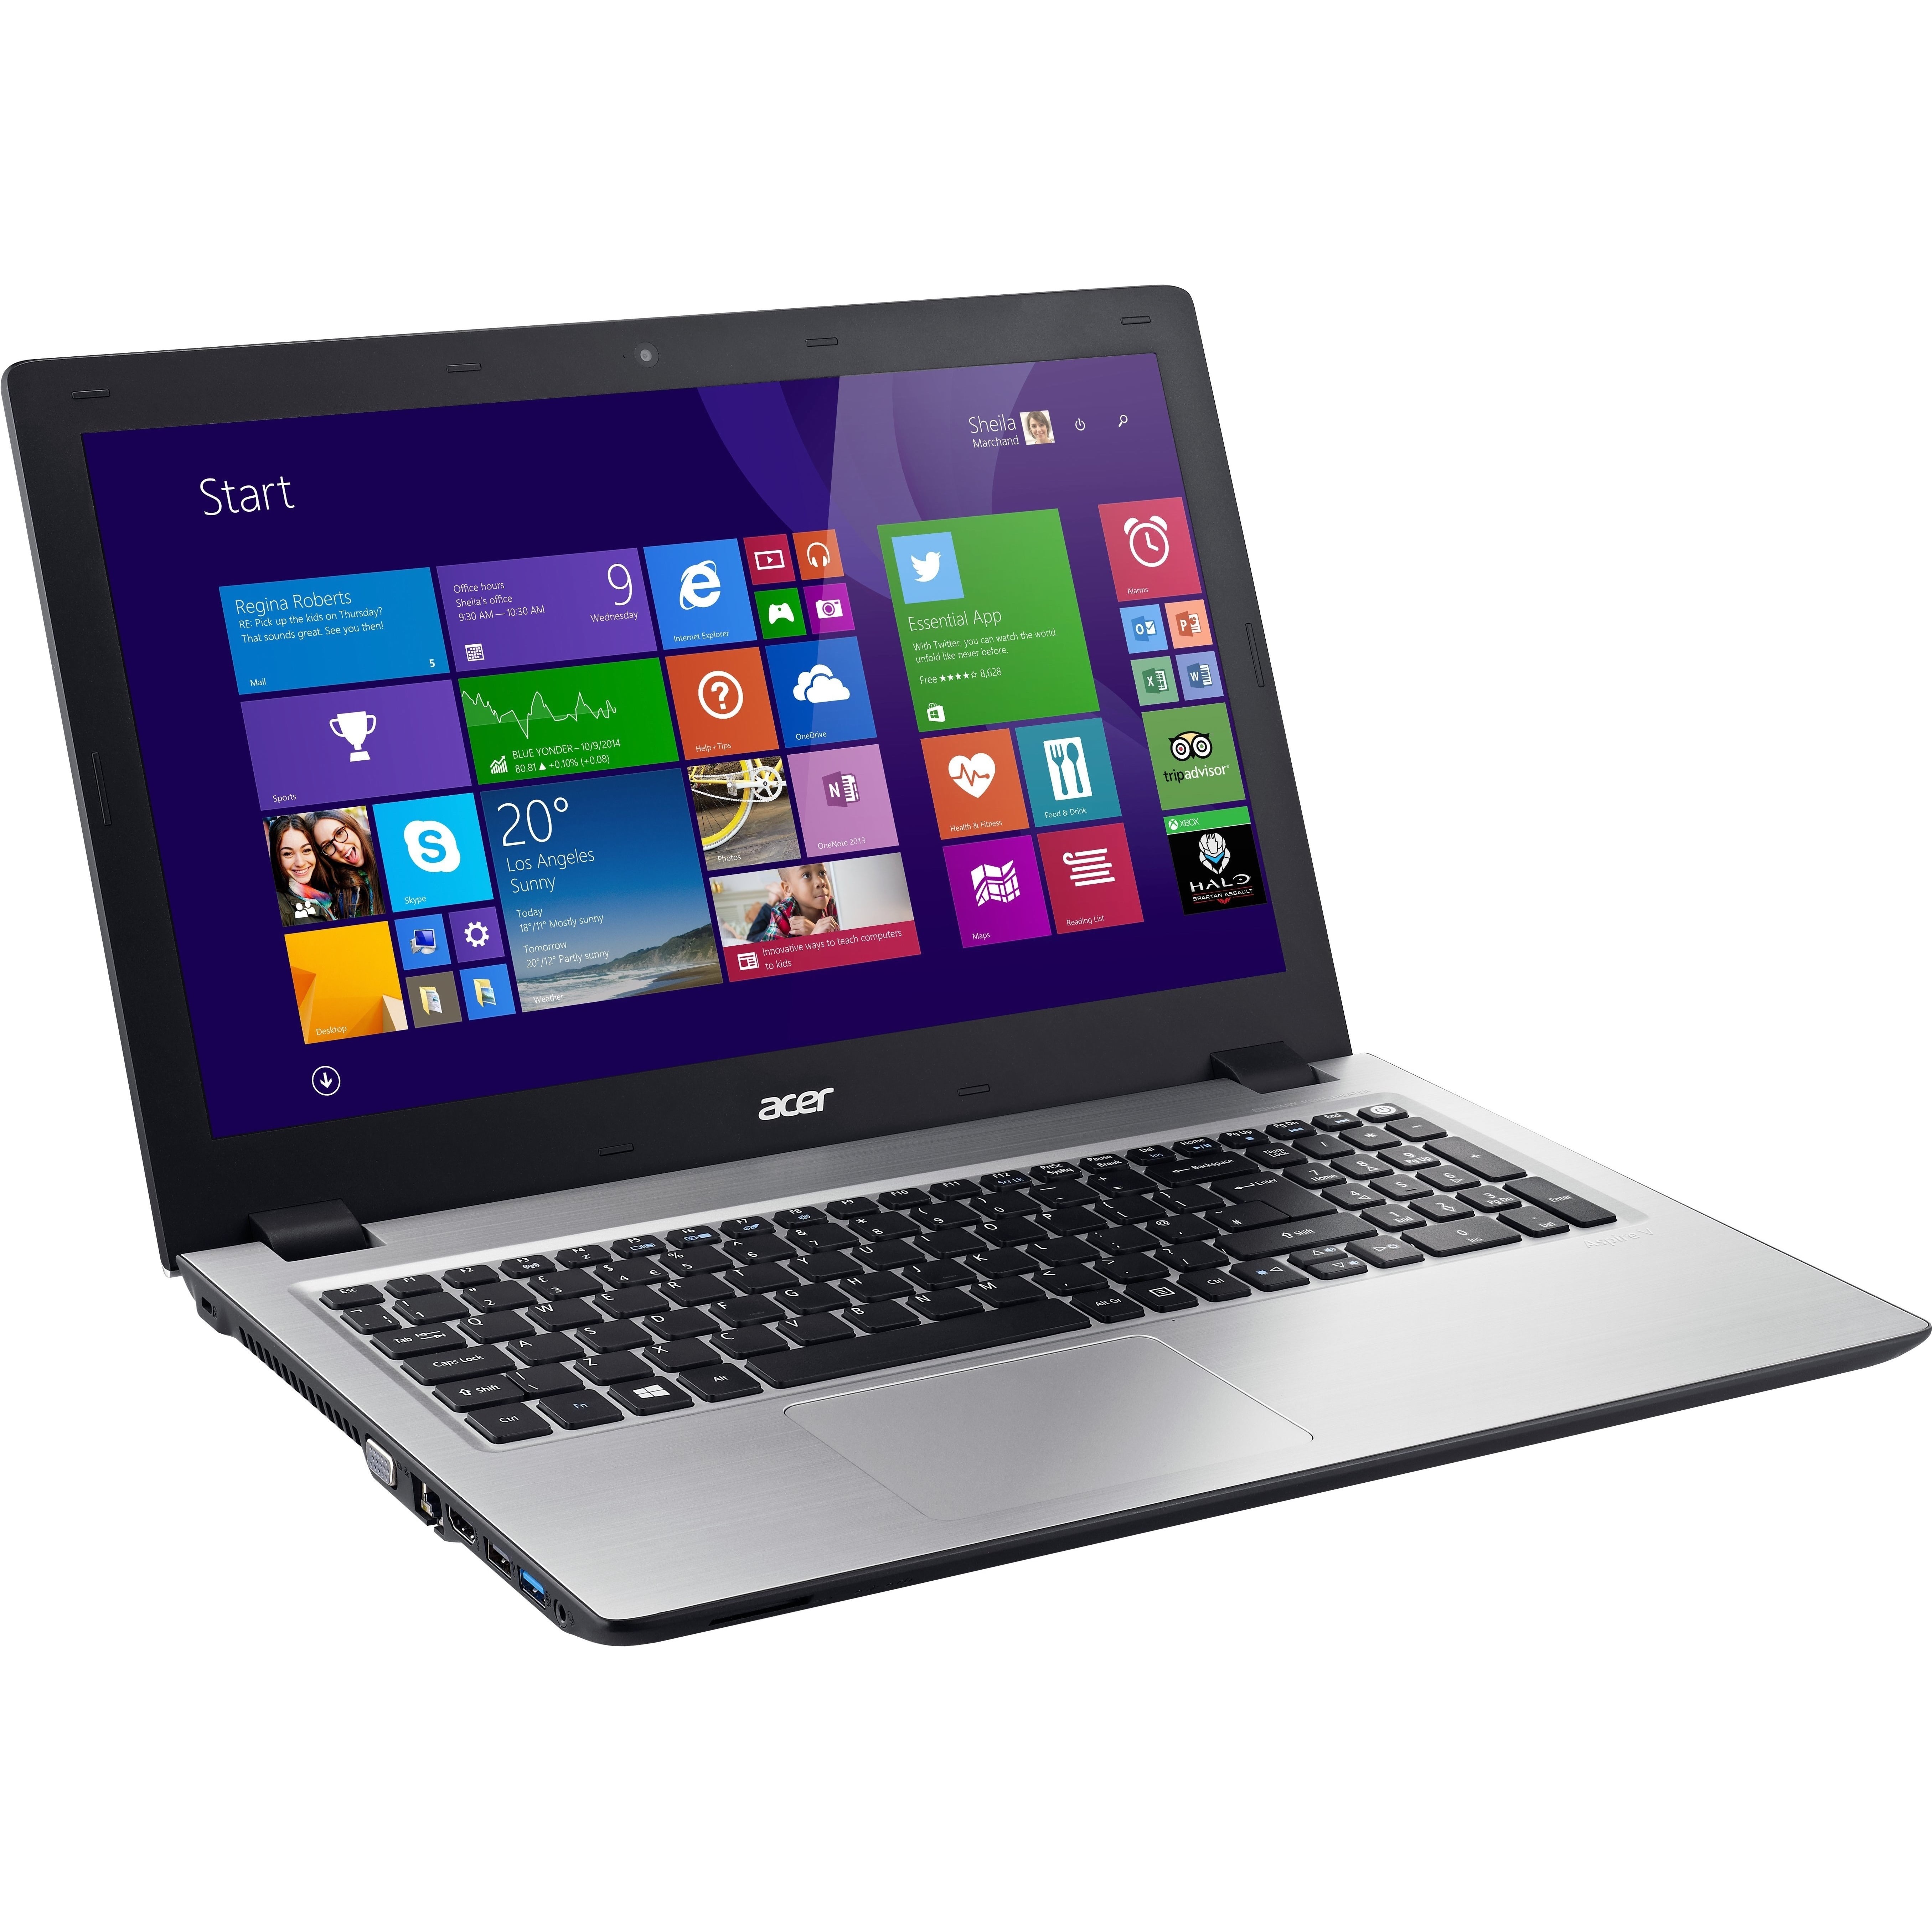 Acer aspire inch laptop